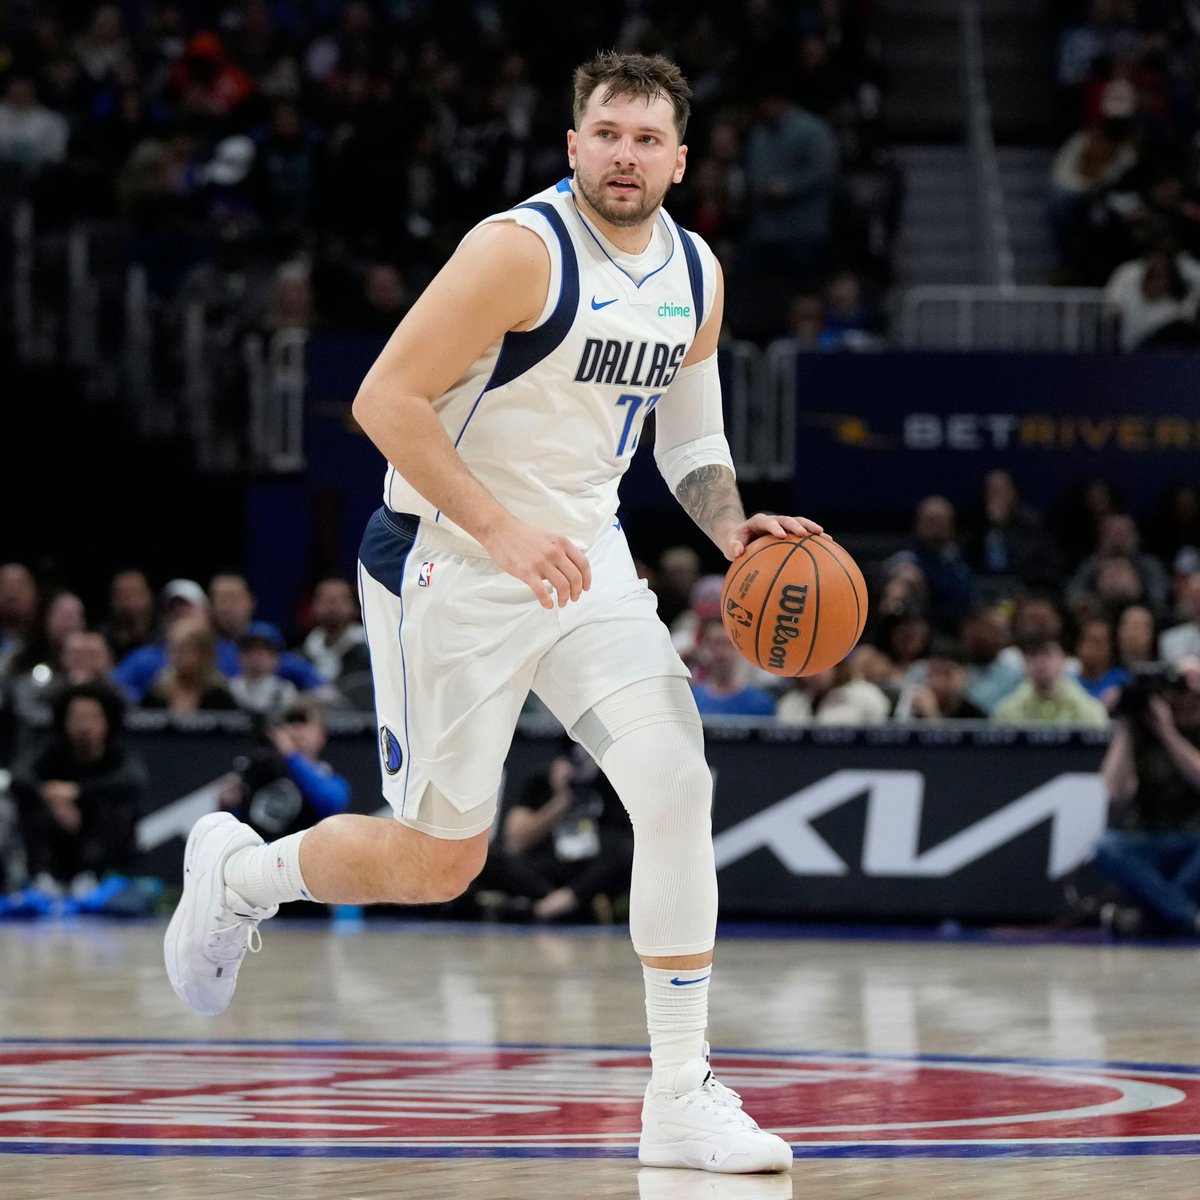 The Mavericks win a pivotal Game 5. Luka Doncic puts up his second Triple Double of the series. Dallas are one win away from a Western Conference Finals appearance. #NBAPlayoffs #MFFL